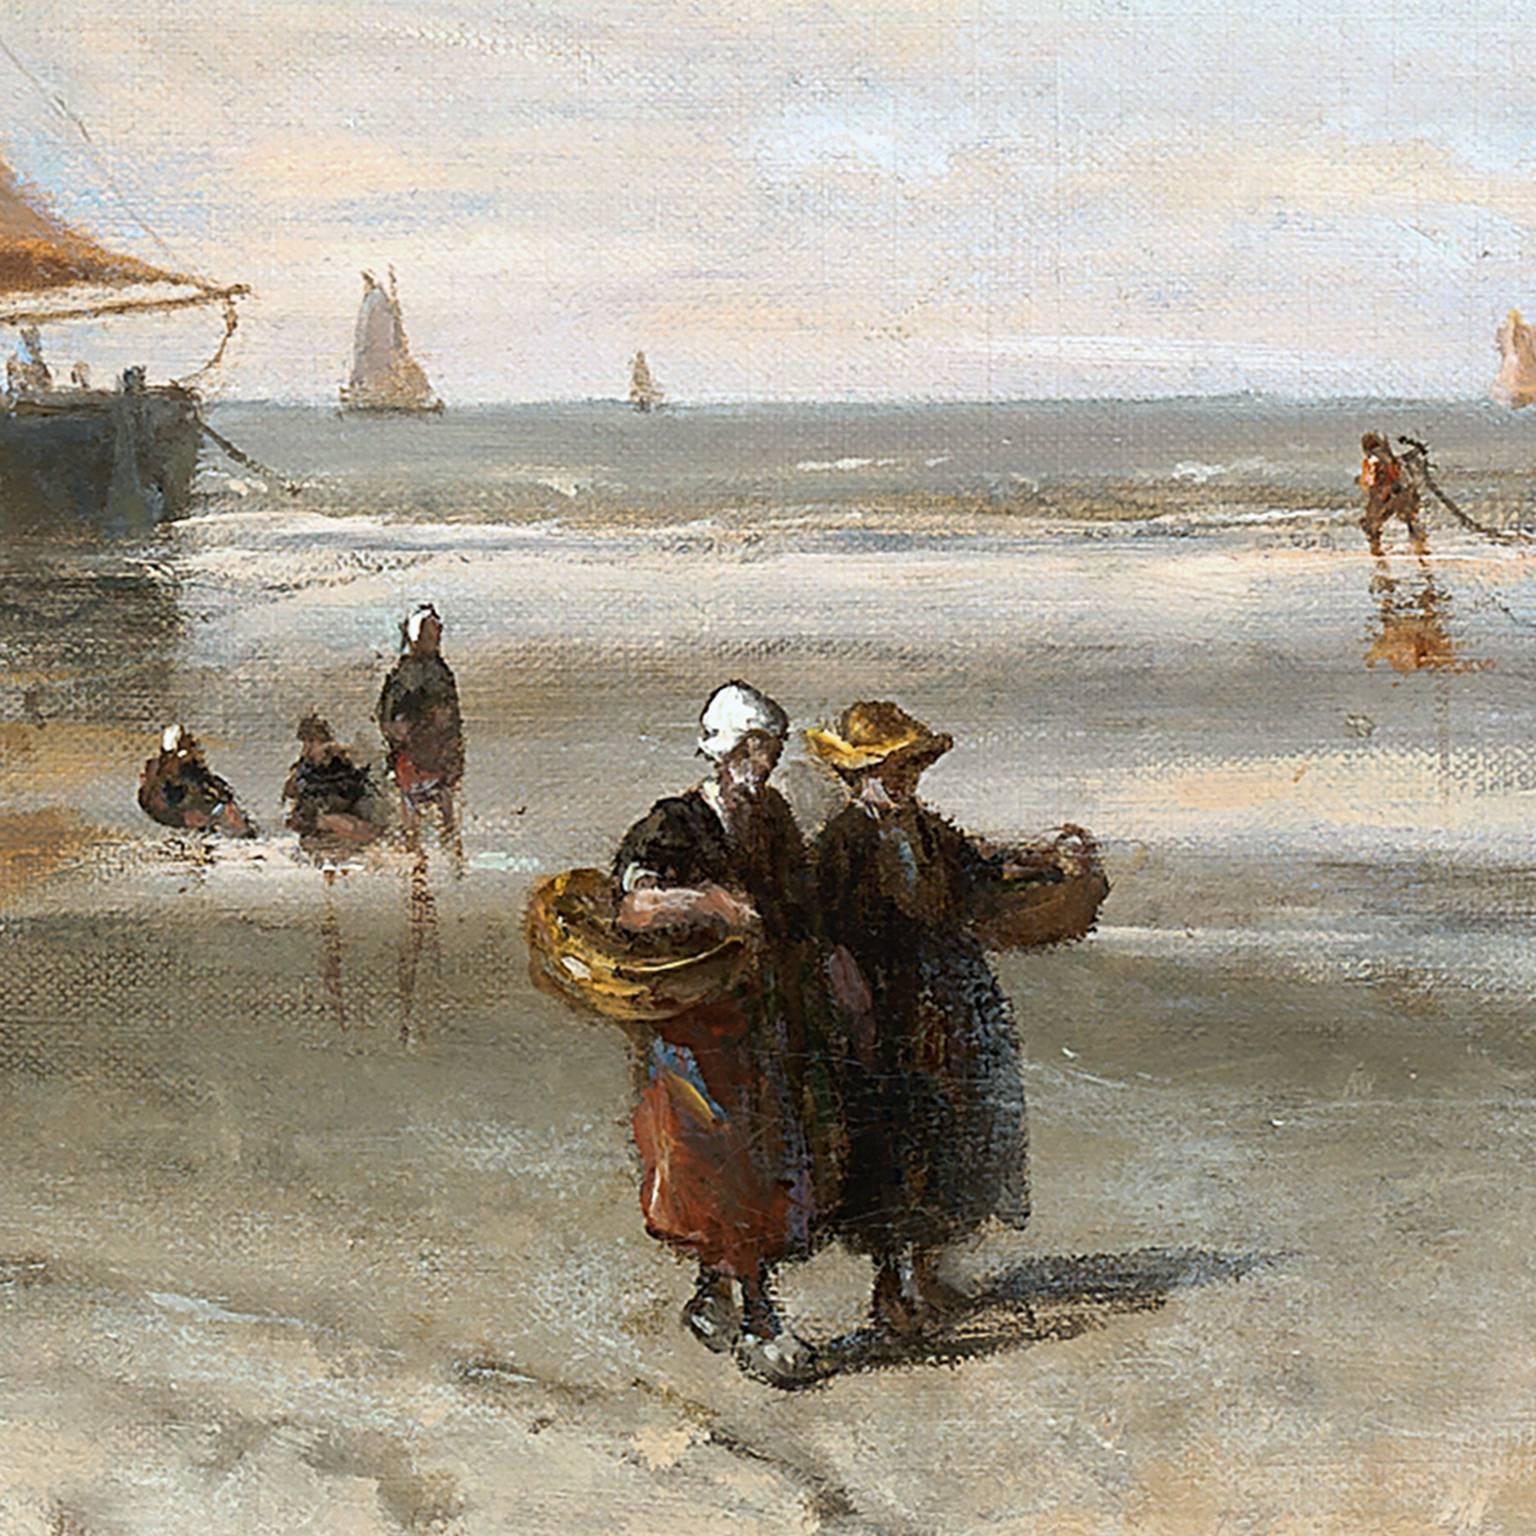 Fishermen's wives near the barges along the coastline - Painting by Mozes Leonardus (Mauritz) Verveer